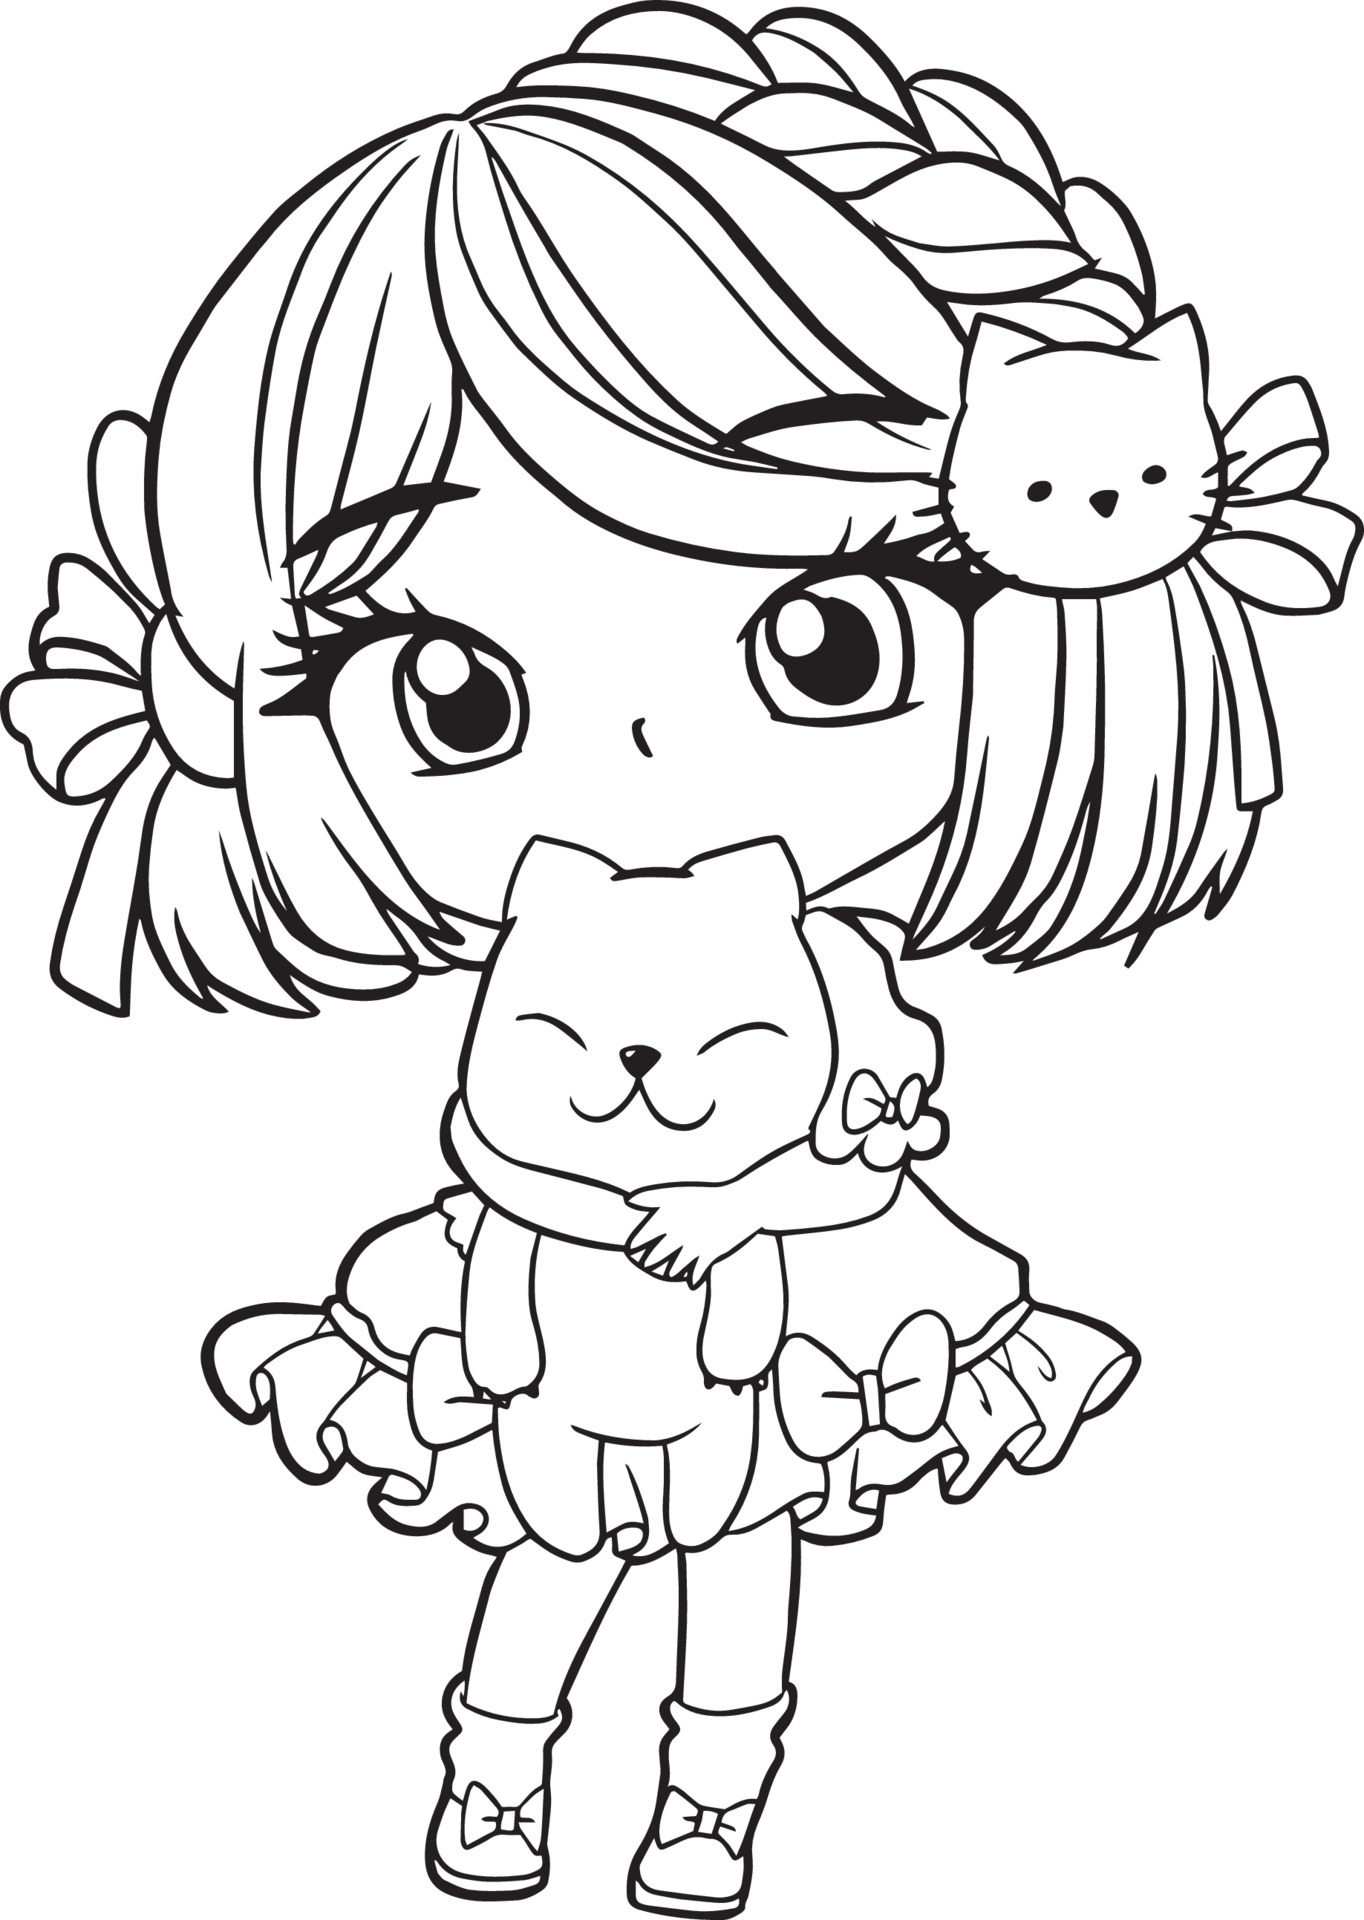 Kawaii Coloring Pages Vector Art, Icons, and Graphics for Free ...